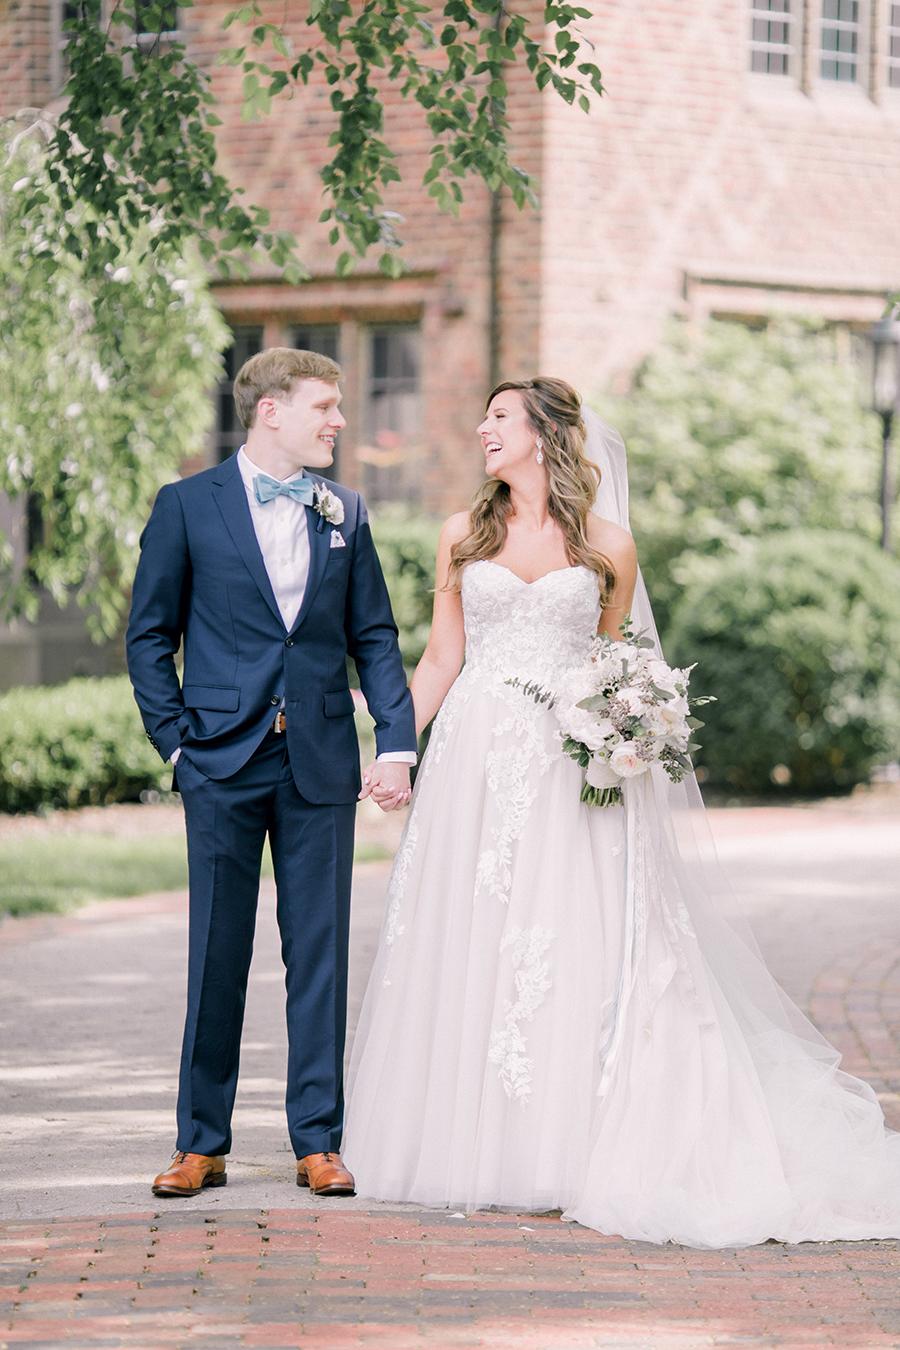 A Romantic Fairytale Wedding At Aldie Mansion Emily Wren Photography Philly In Love Philadelphia Wedding Blog Venues Vendors